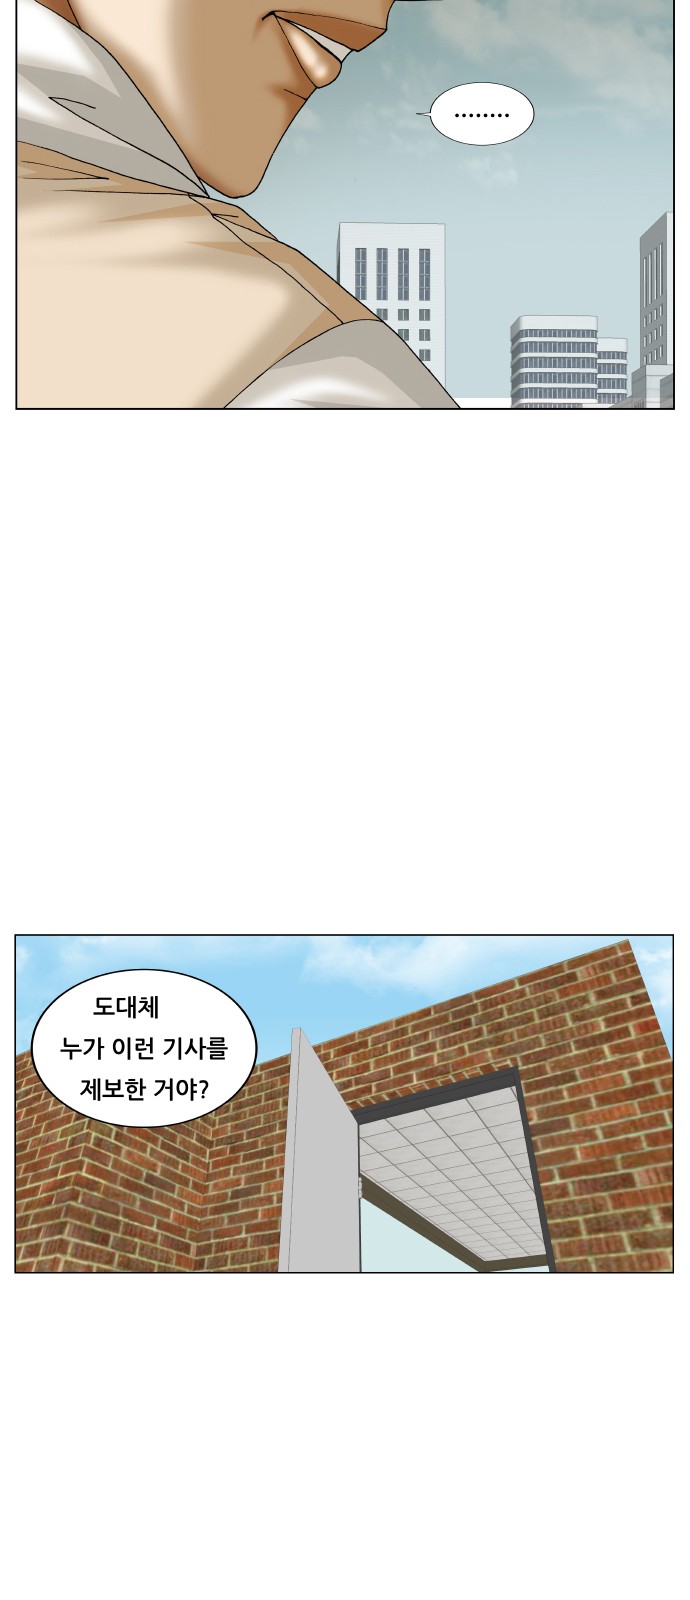 Ultimate Legend - Kang Hae Hyo - Chapter 228 - Page 3